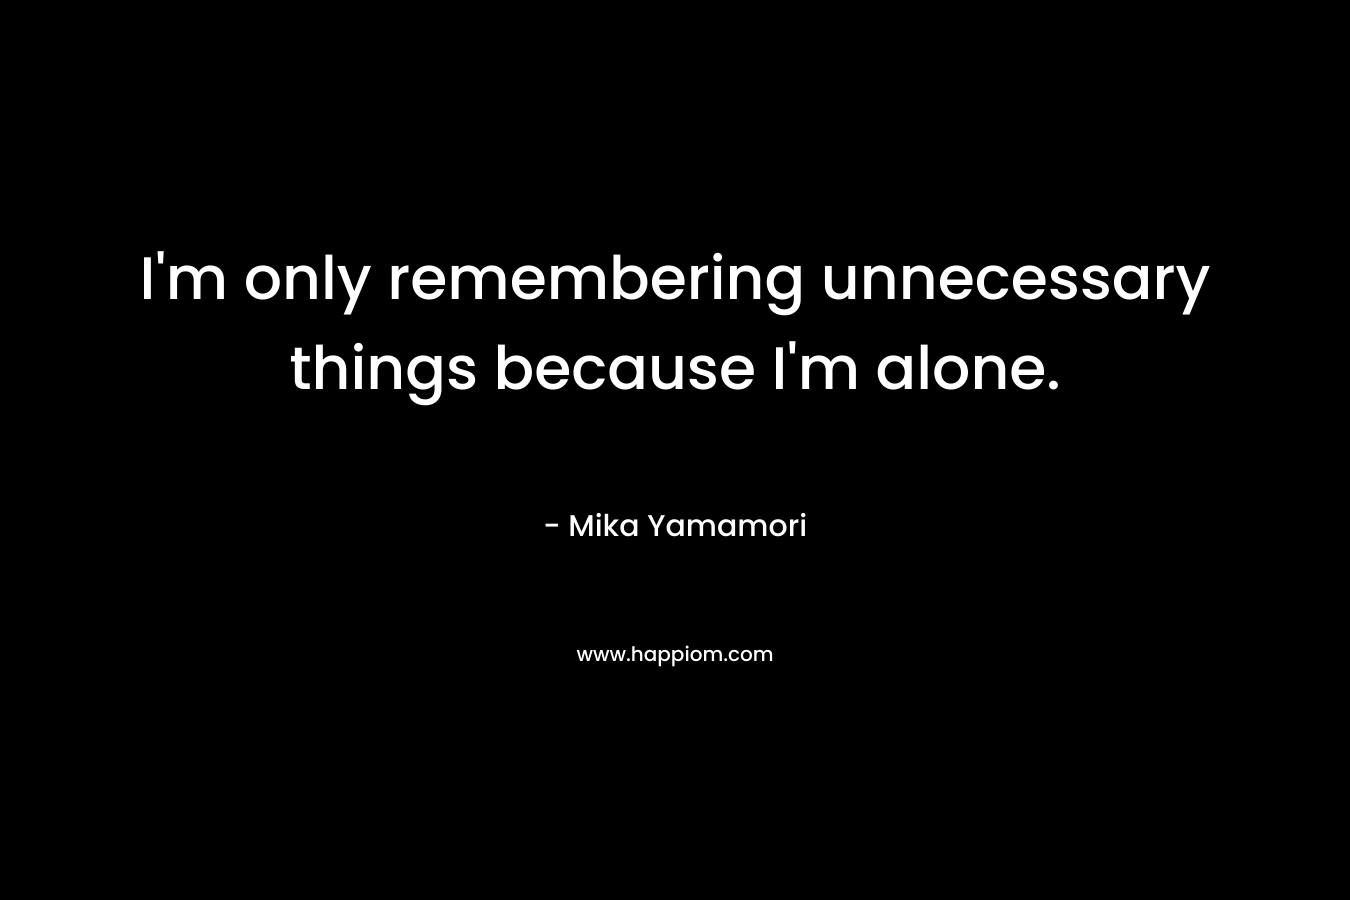 I’m only remembering unnecessary things because I’m alone. – Mika Yamamori